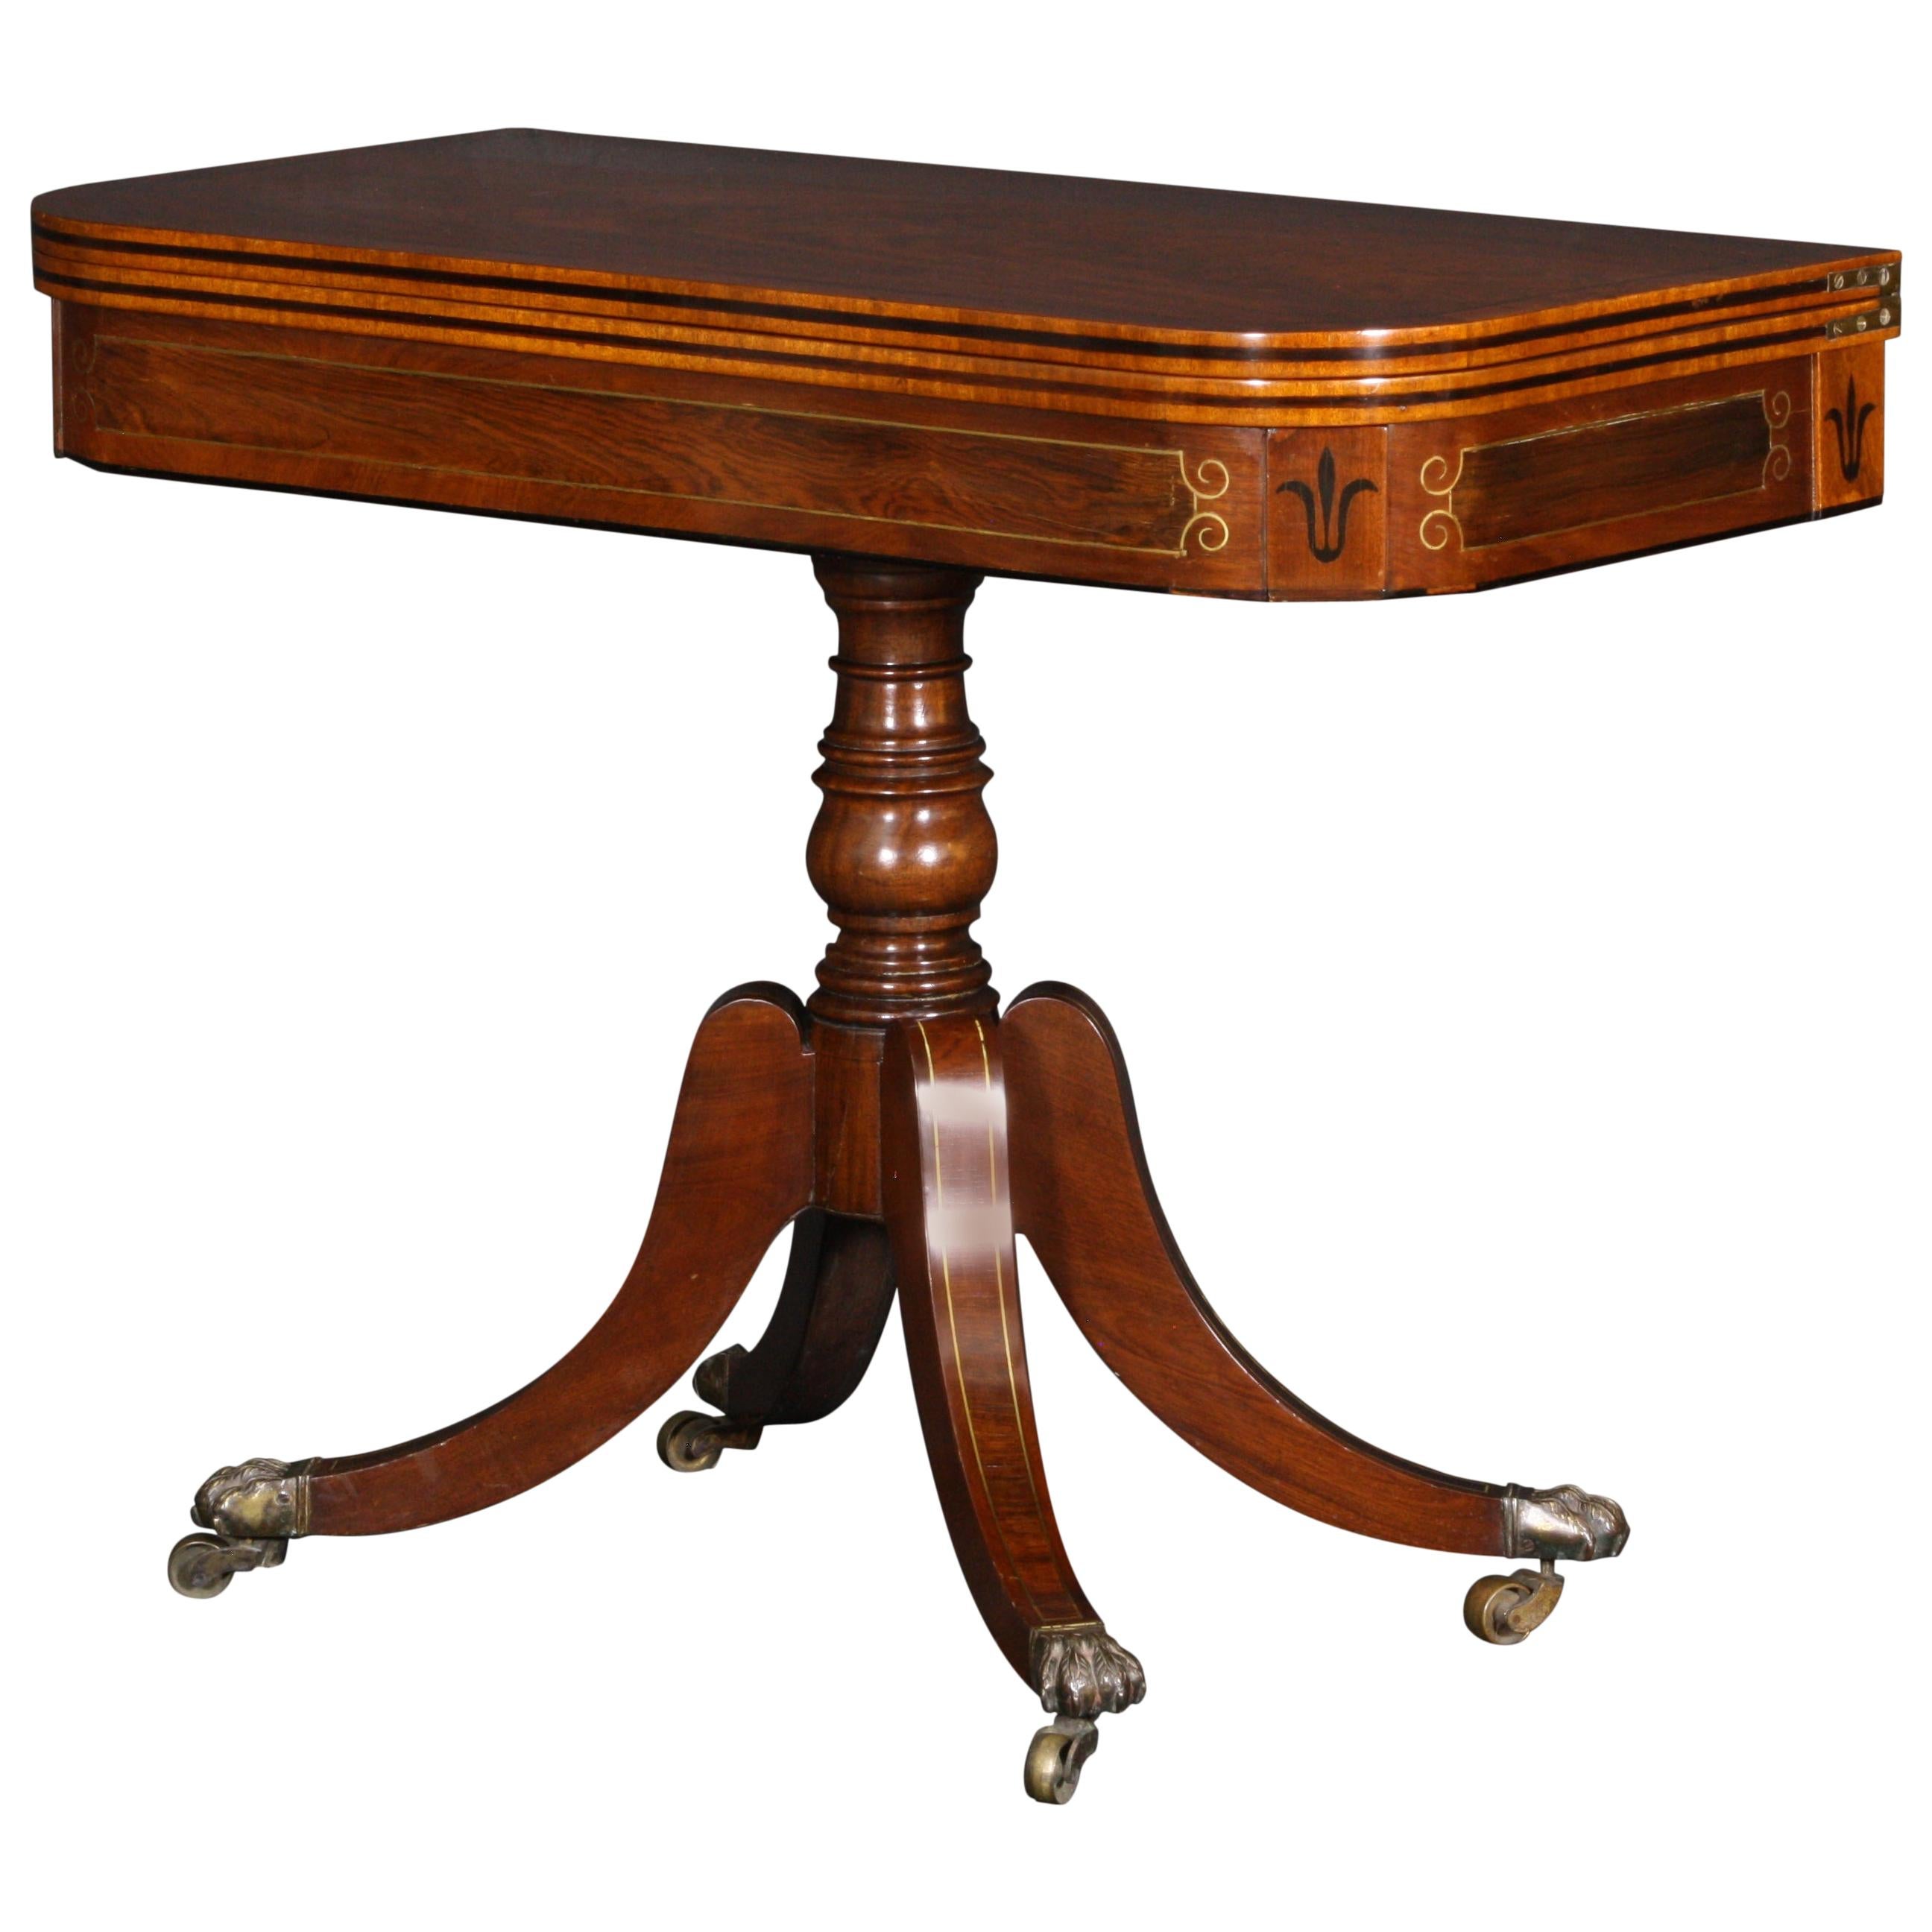 19th Century Regency Mahogany and Rosewood Games Table with Brass Inlay